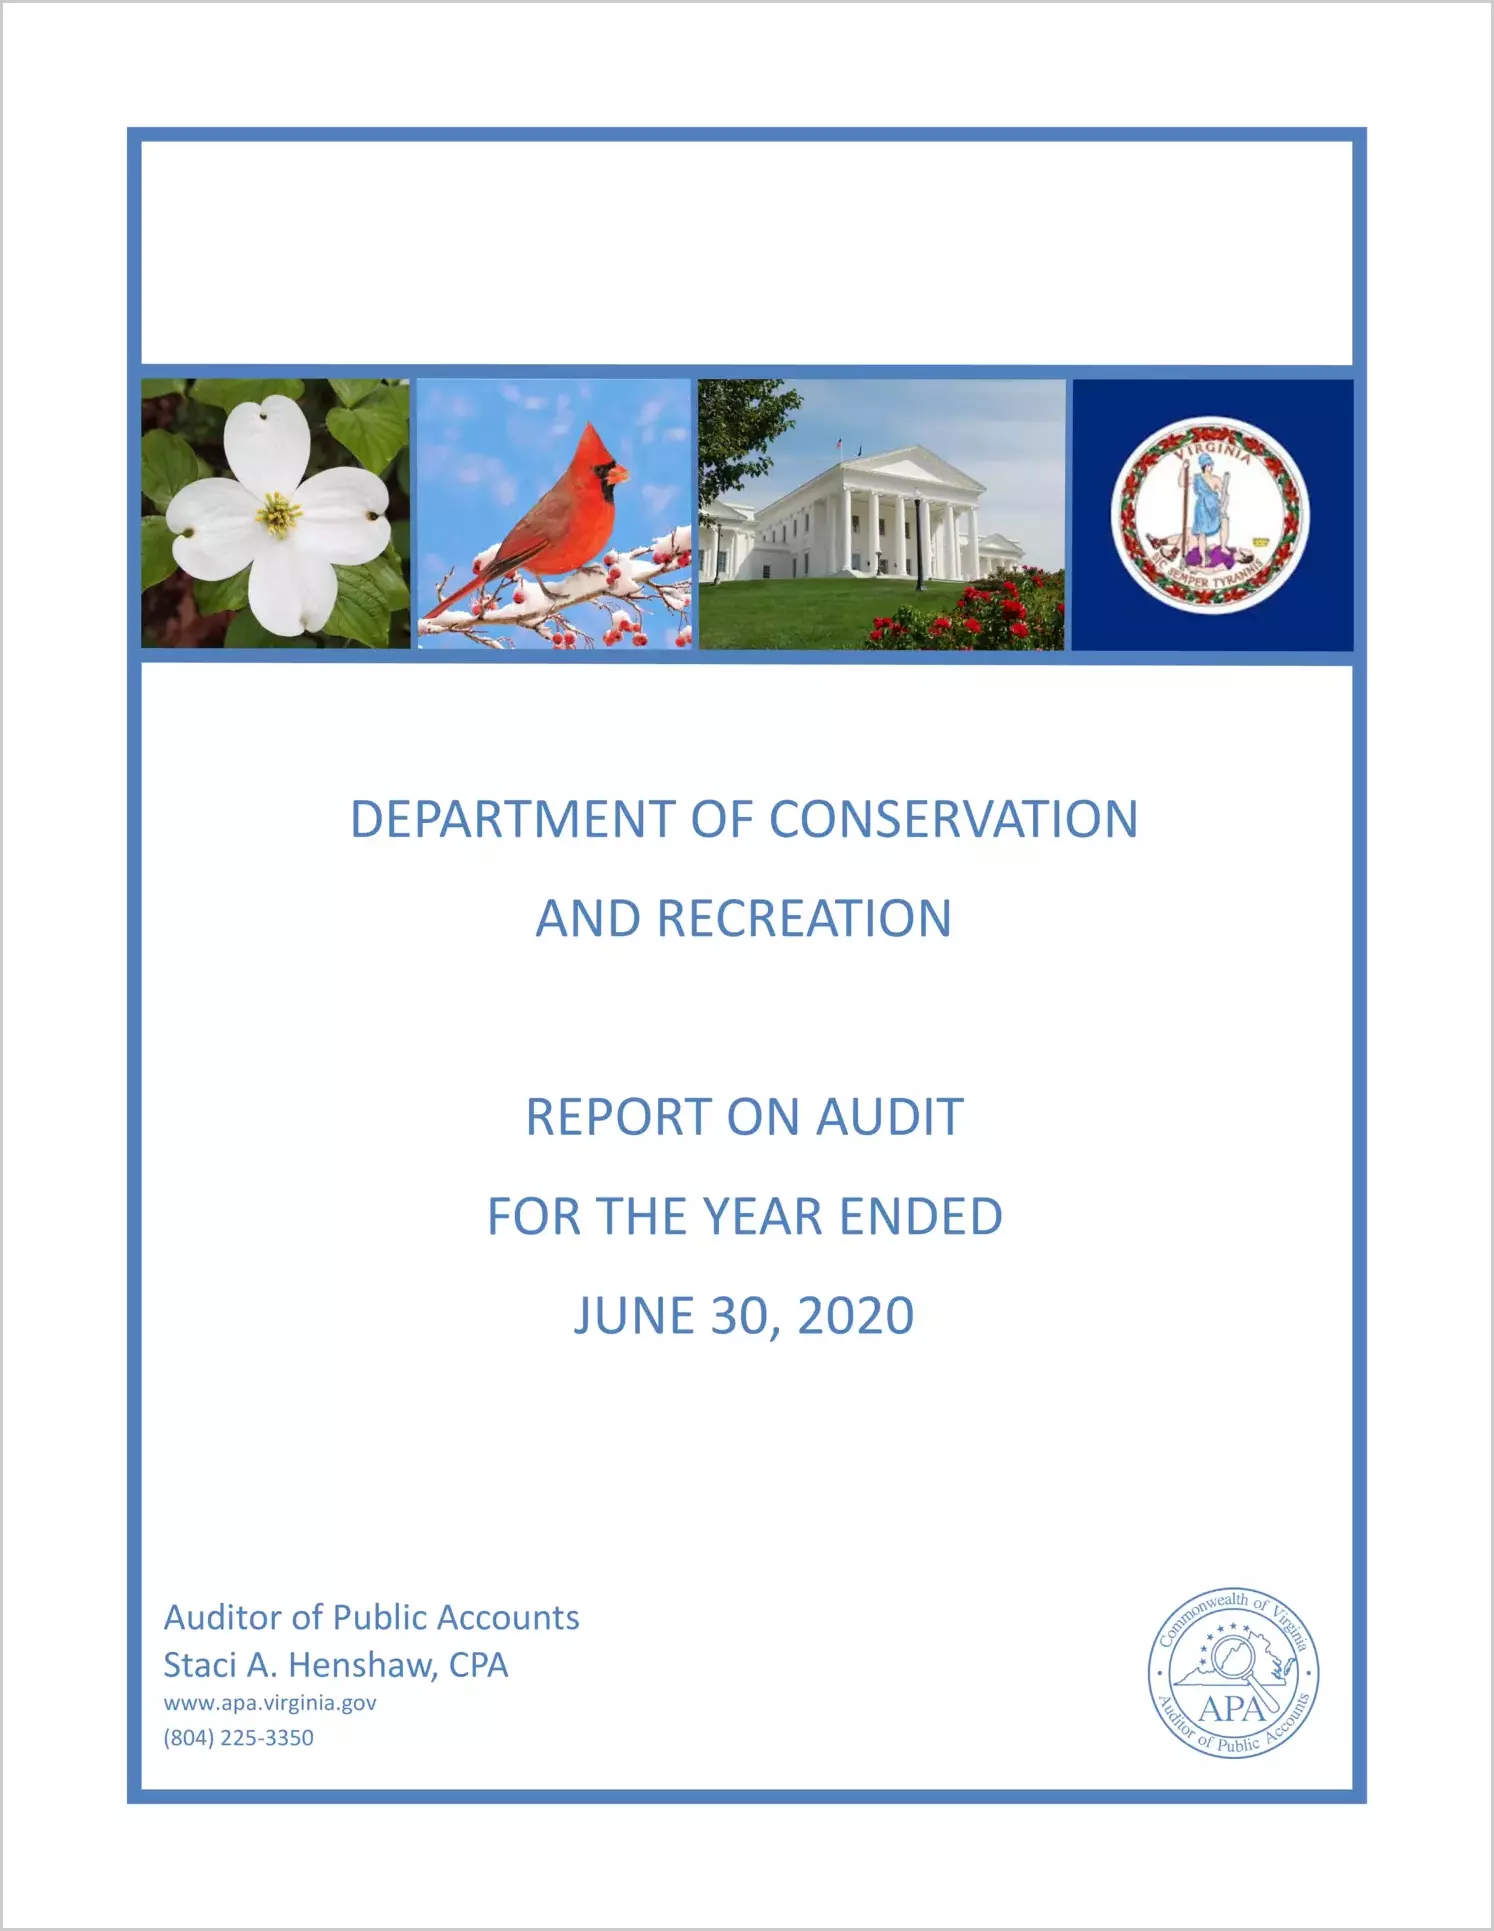 Department of Conservation and Recreation for the year ended June 30, 2020